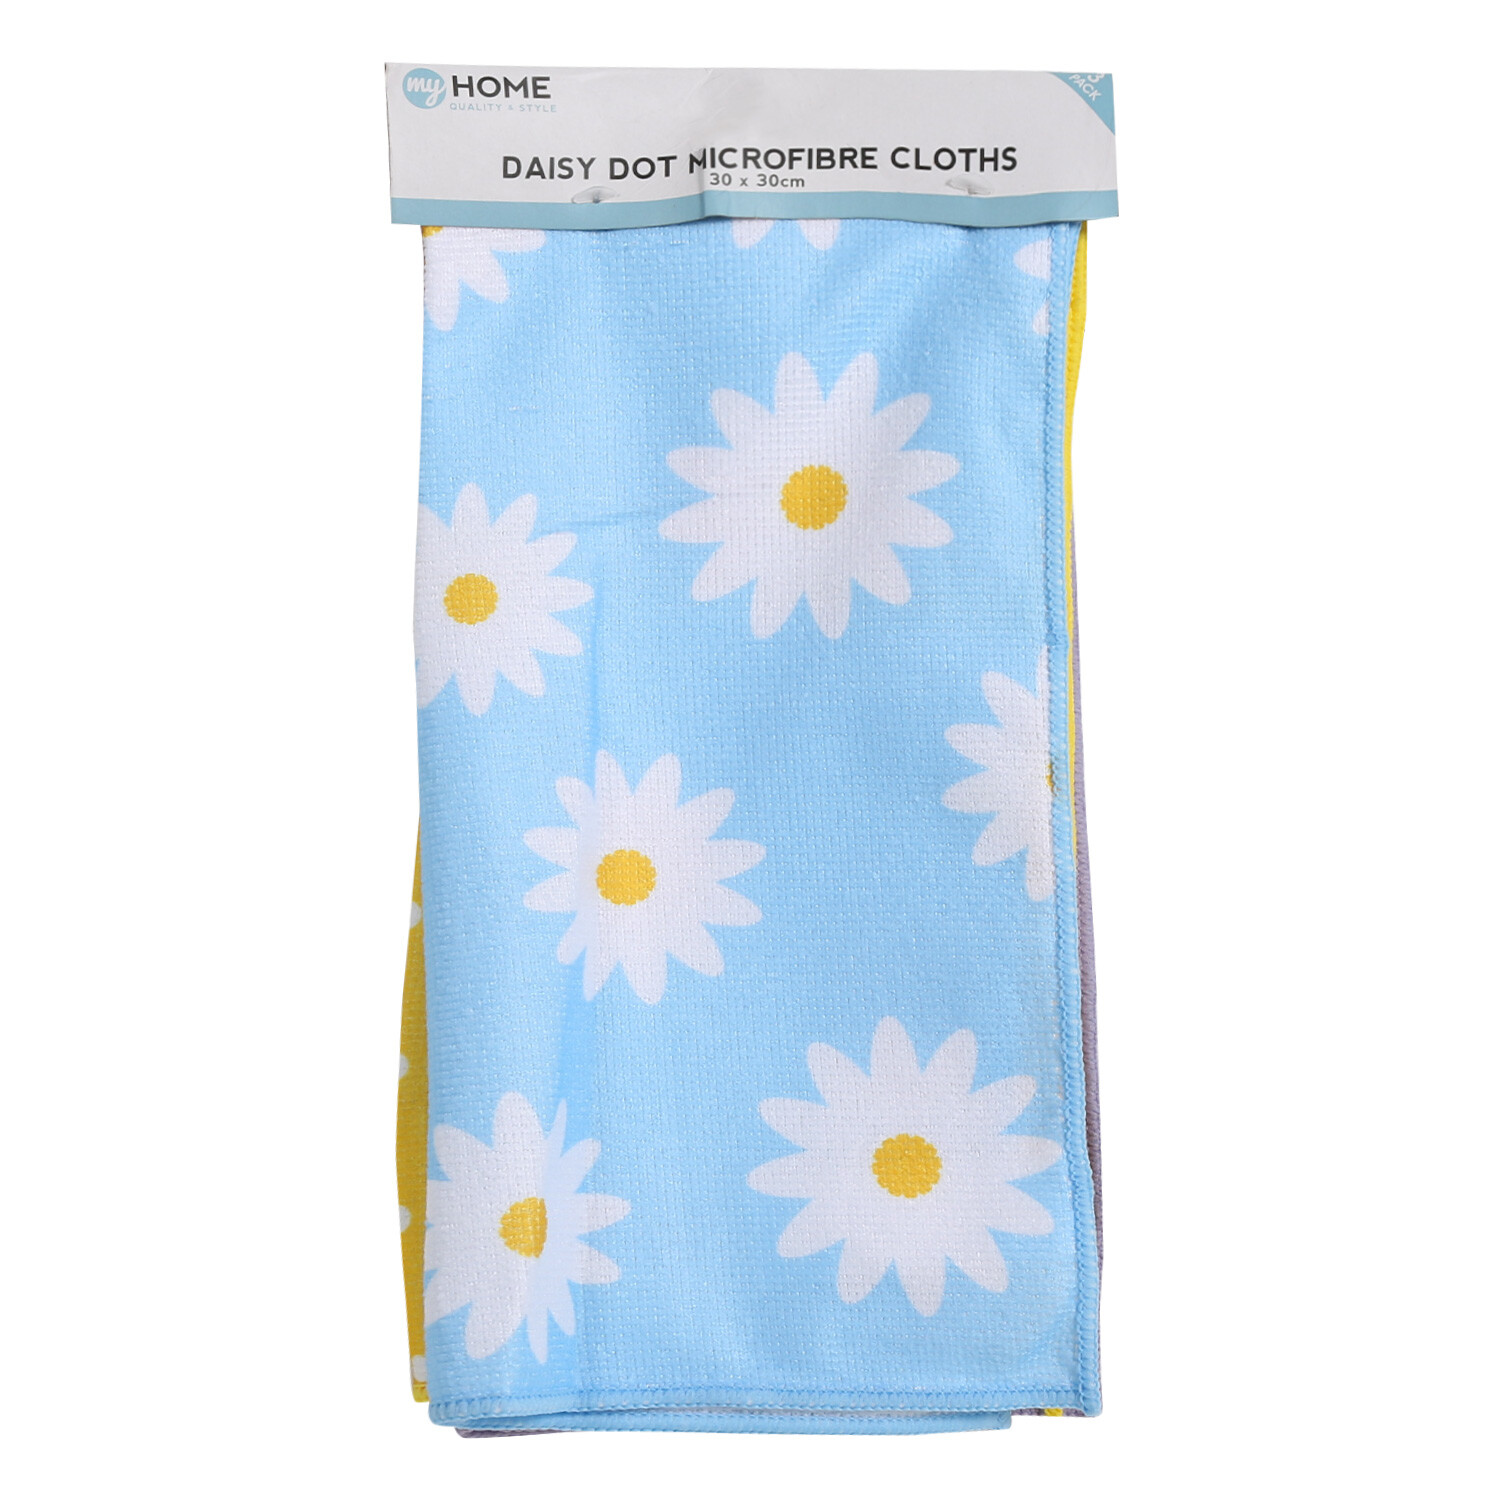 My Home Pack of Three Daisy Dot Microfibre Cloths Image